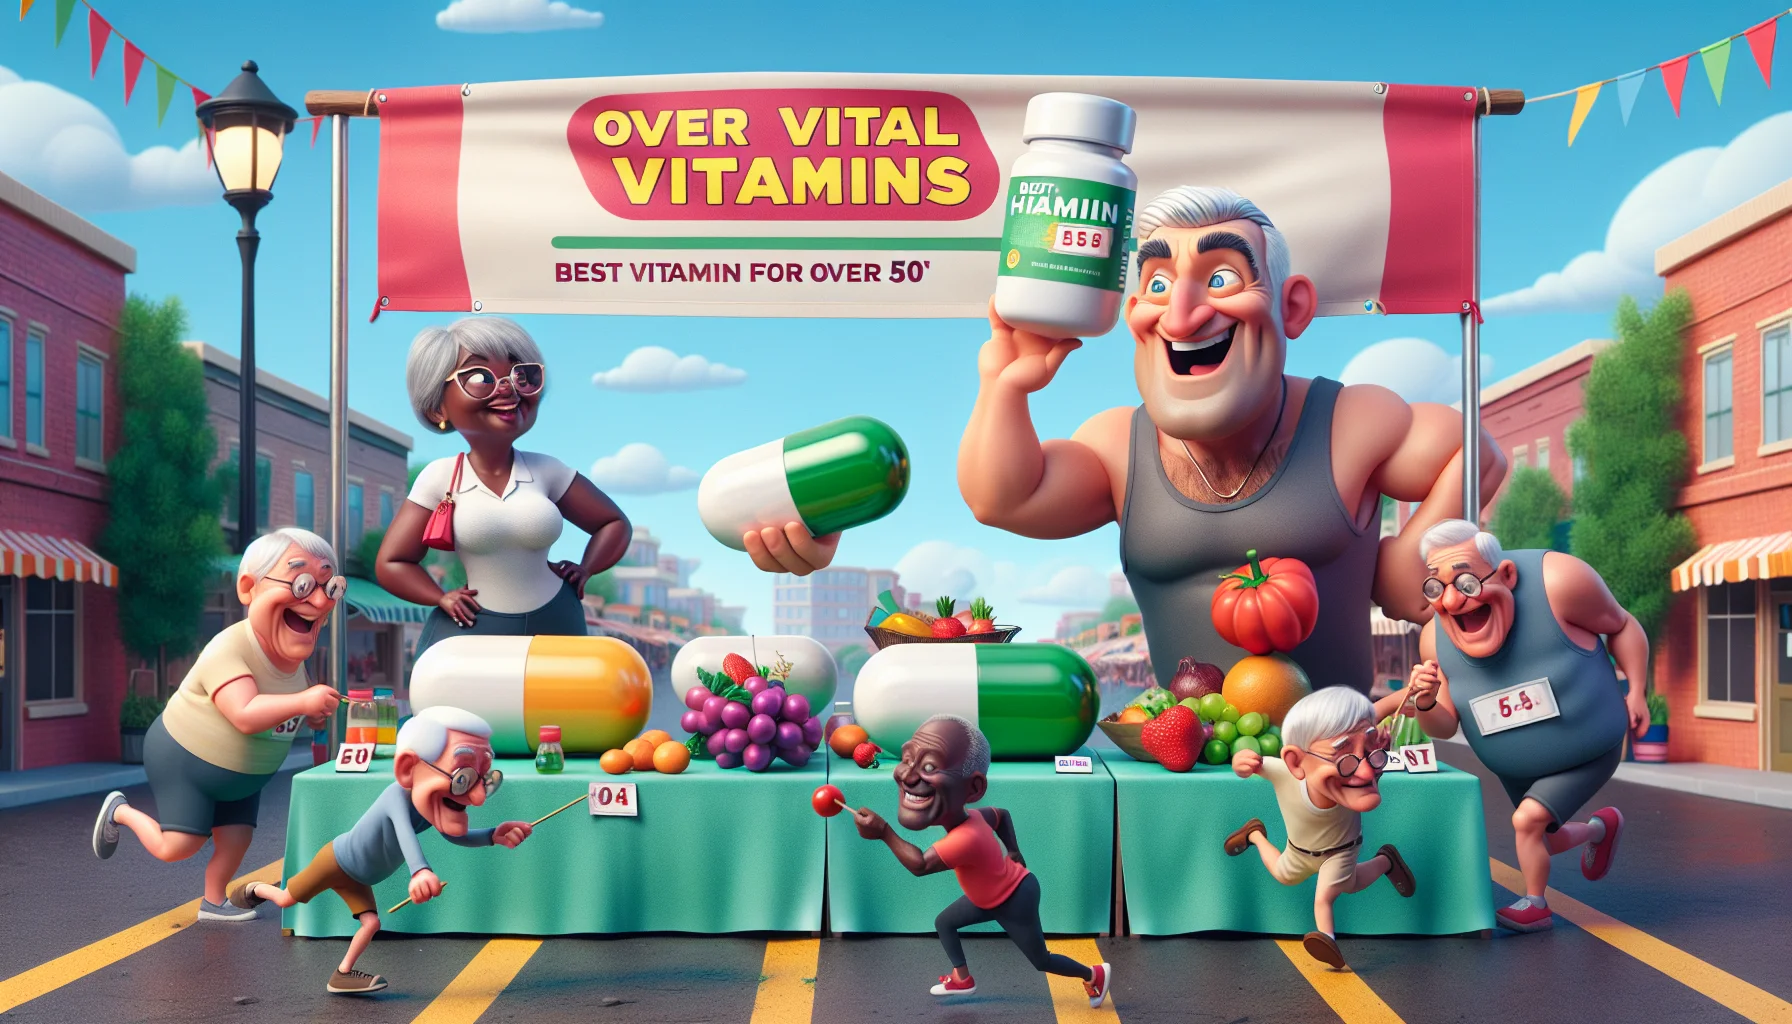 A humorous scene takes place in a vibrant farmer's market. An elderly Caucasian man in a cheerful demeanor stands behind a market stall named 'Over 50's Vital Vitamins'. He is proudly showcasing oversized, cartoonish vitamin pills labeled 'Best Vitamin for Men Over 50'. Nearby, a group of animated seniors, including a Black woman, a Hispanic man, and an Asian woman, are enthusiastically participating in an 'eating healthy' race. They're balancing a variety of colorful fruits and vegetables on spoons in their mouths, vying to reach a finish line drawn near the vitamin stall.